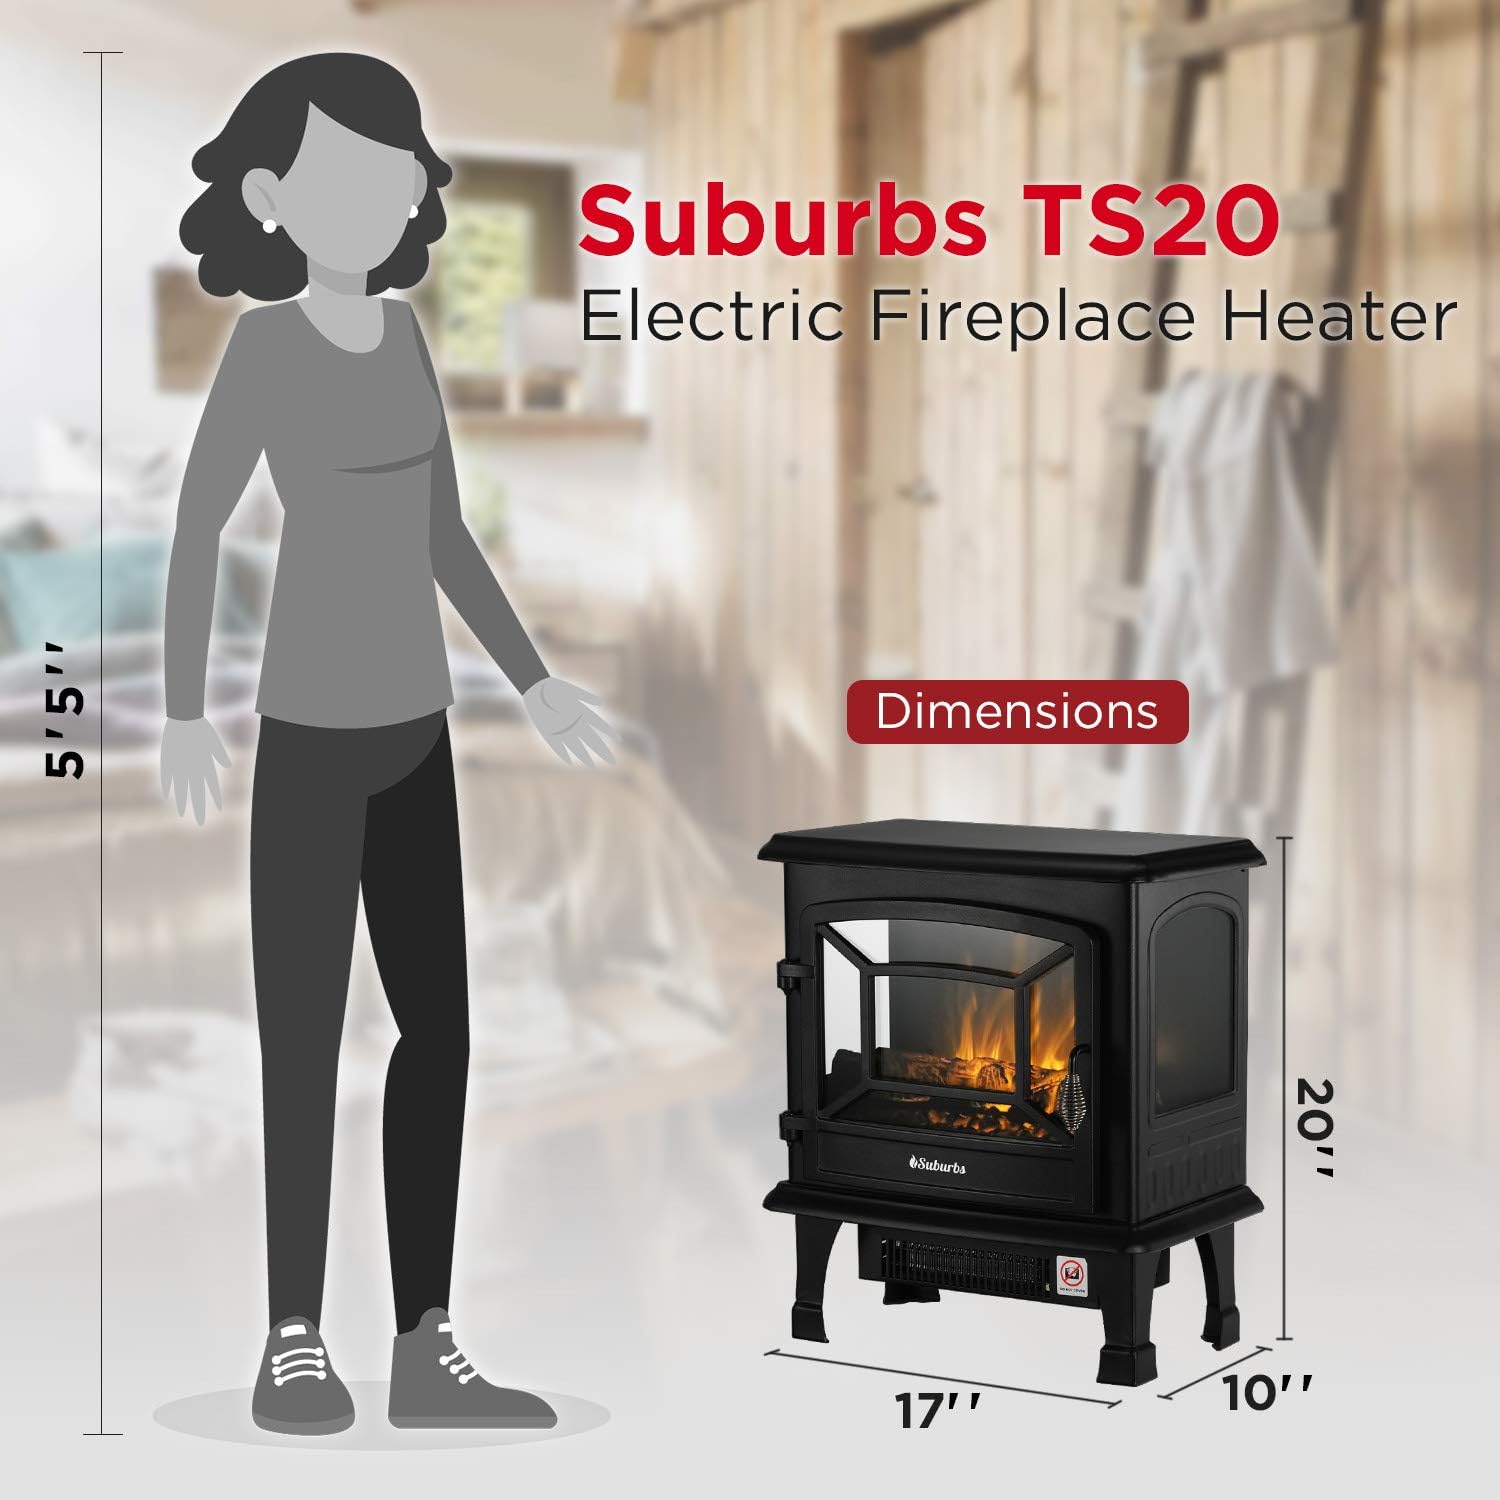 TURBRO Suburbs TS20 Electric Fireplace dimensions